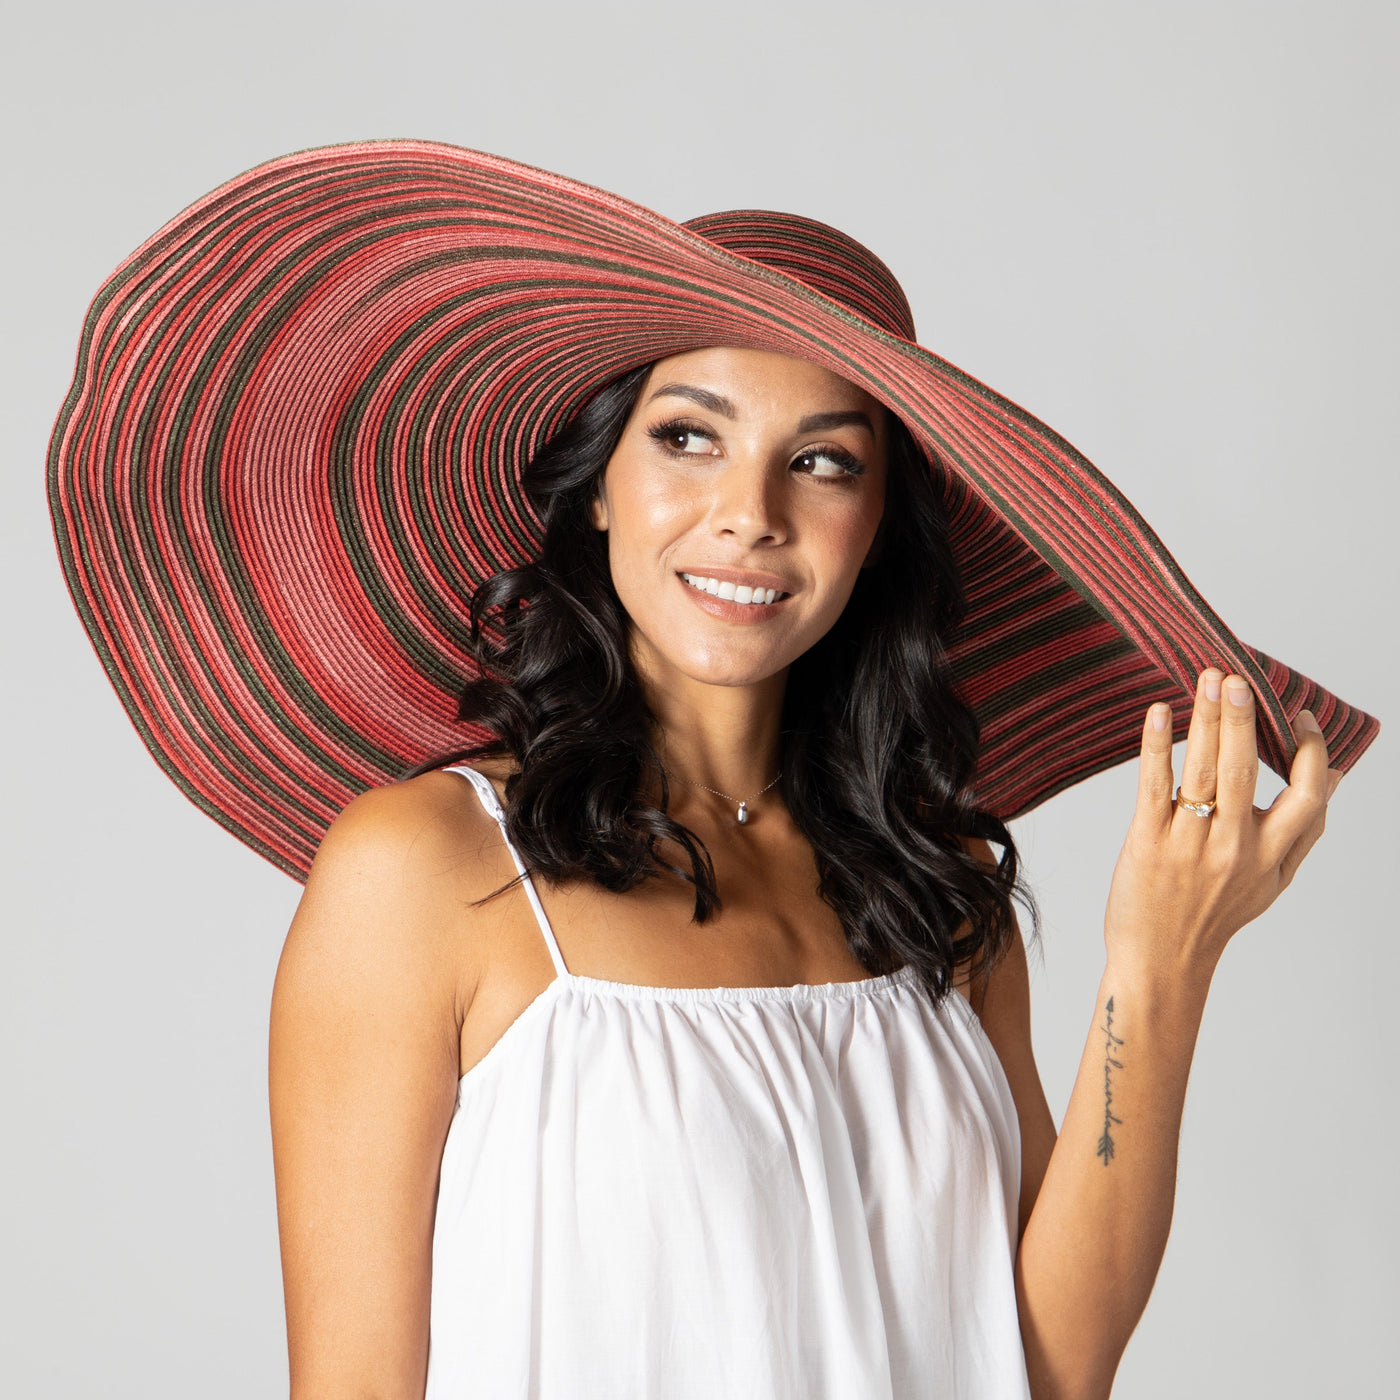 The Look At Me Floppy – San Diego Hat Company